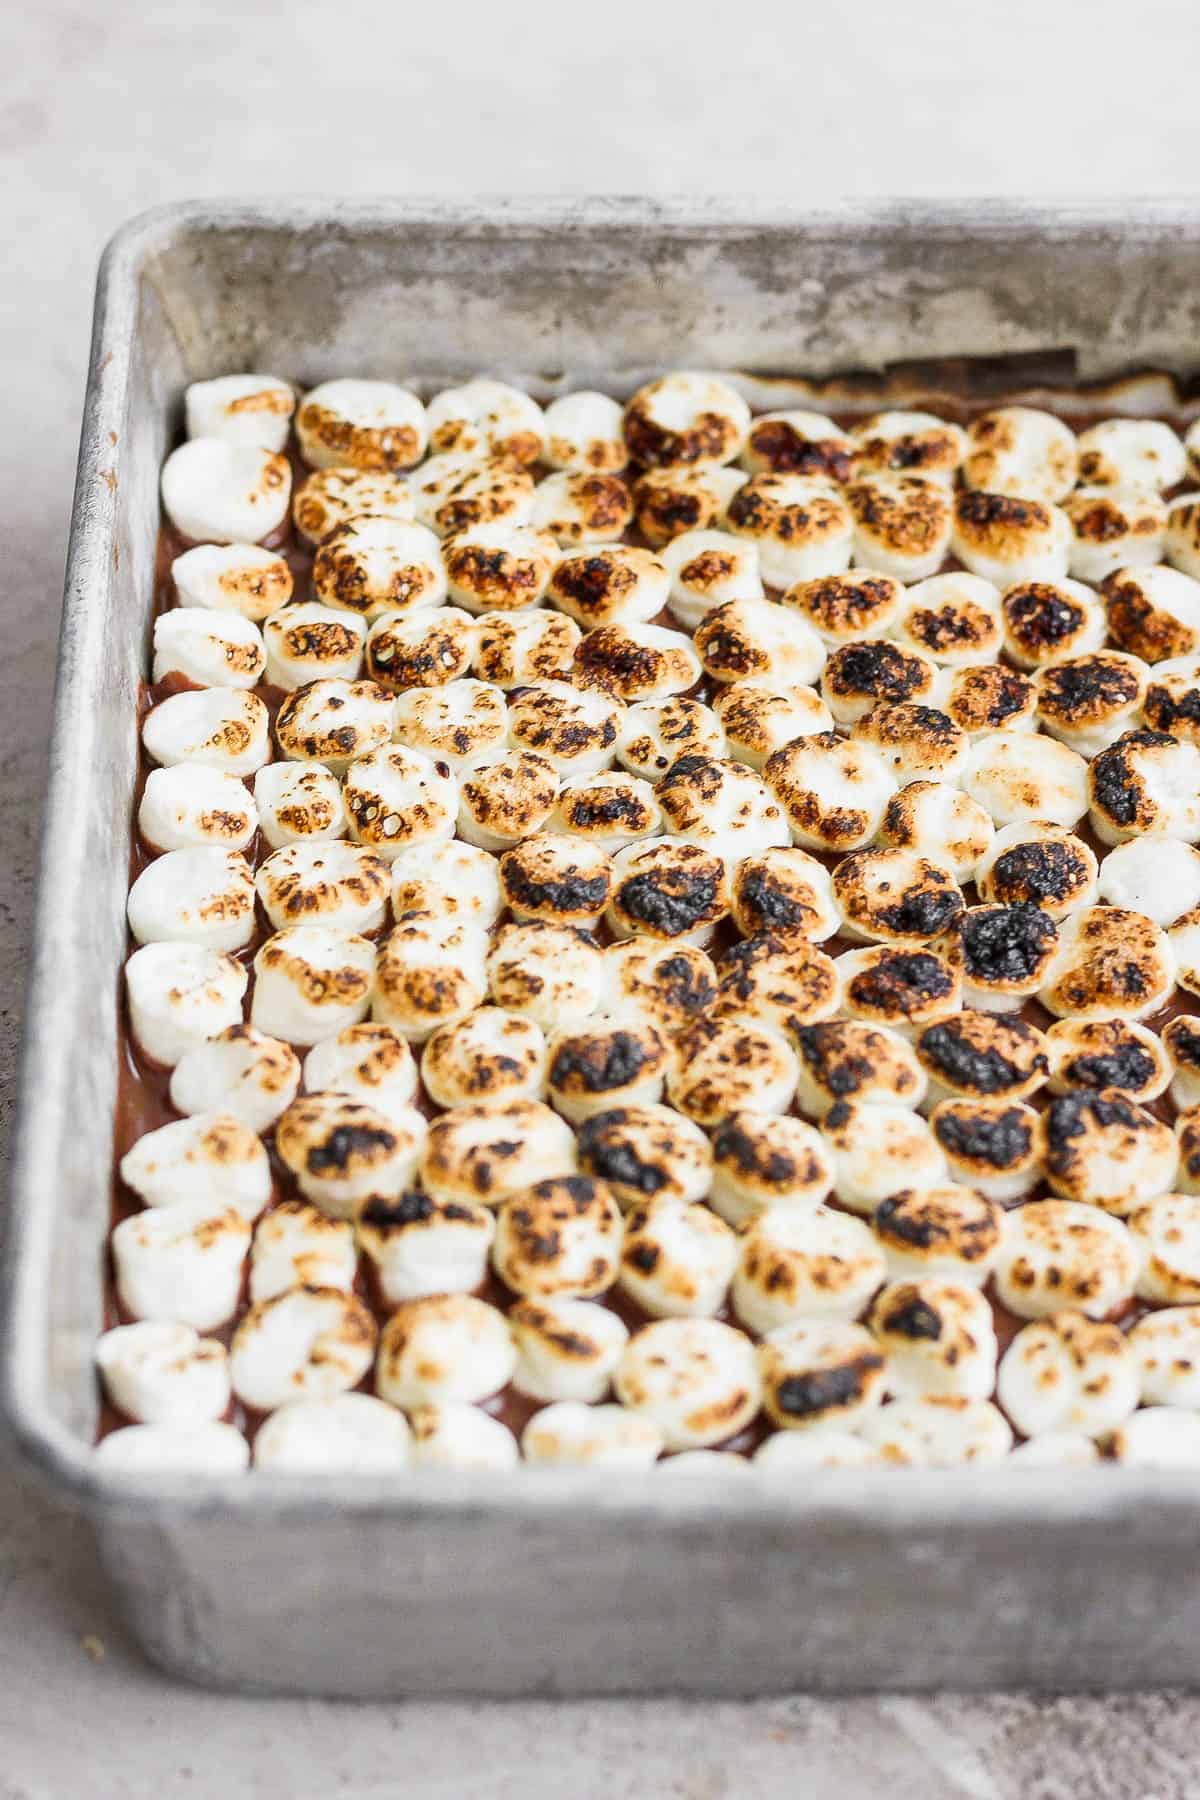 S'mores bars in a pan with the marshmallows toasted.